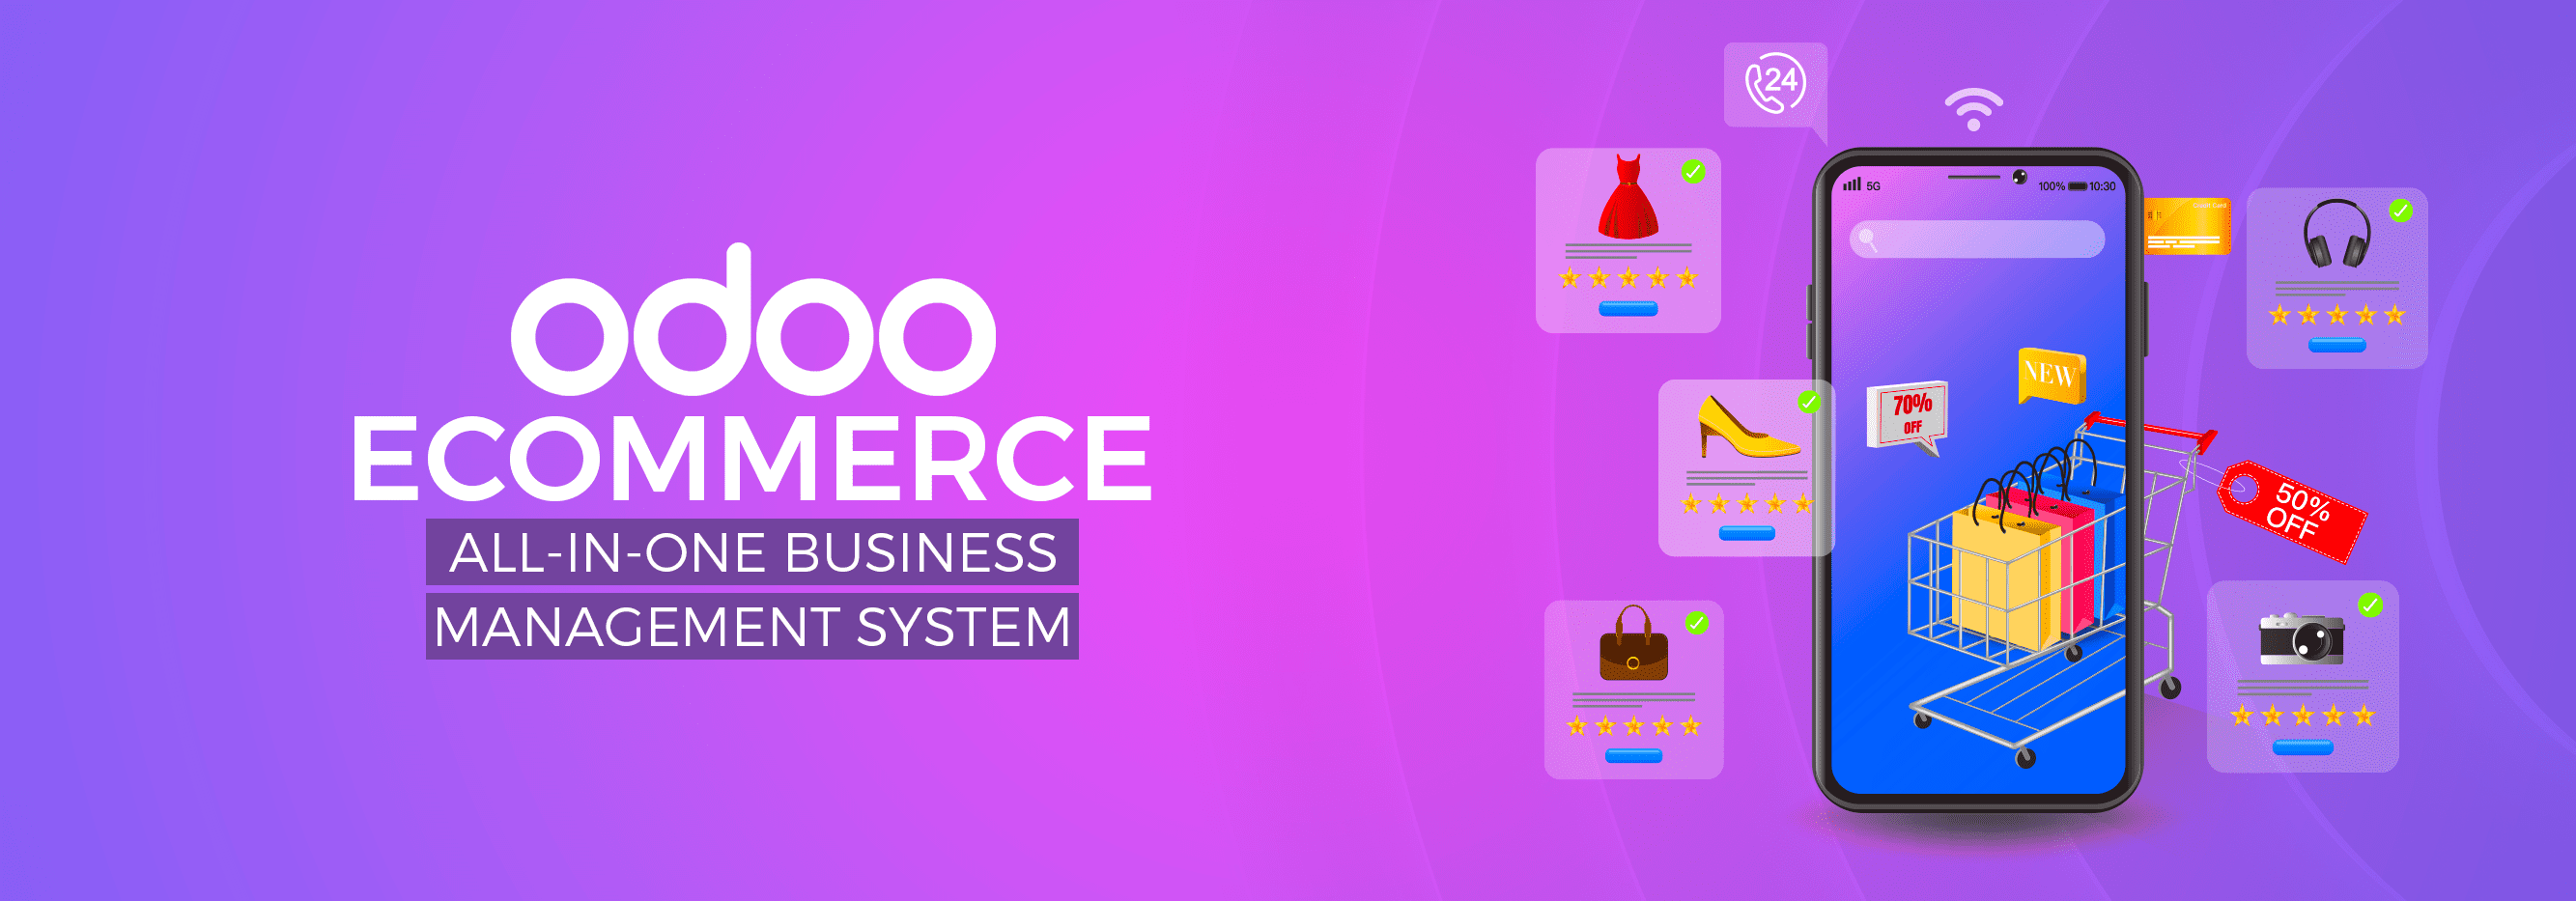 Odoo eCommerce All-in-One Business Management System_banner